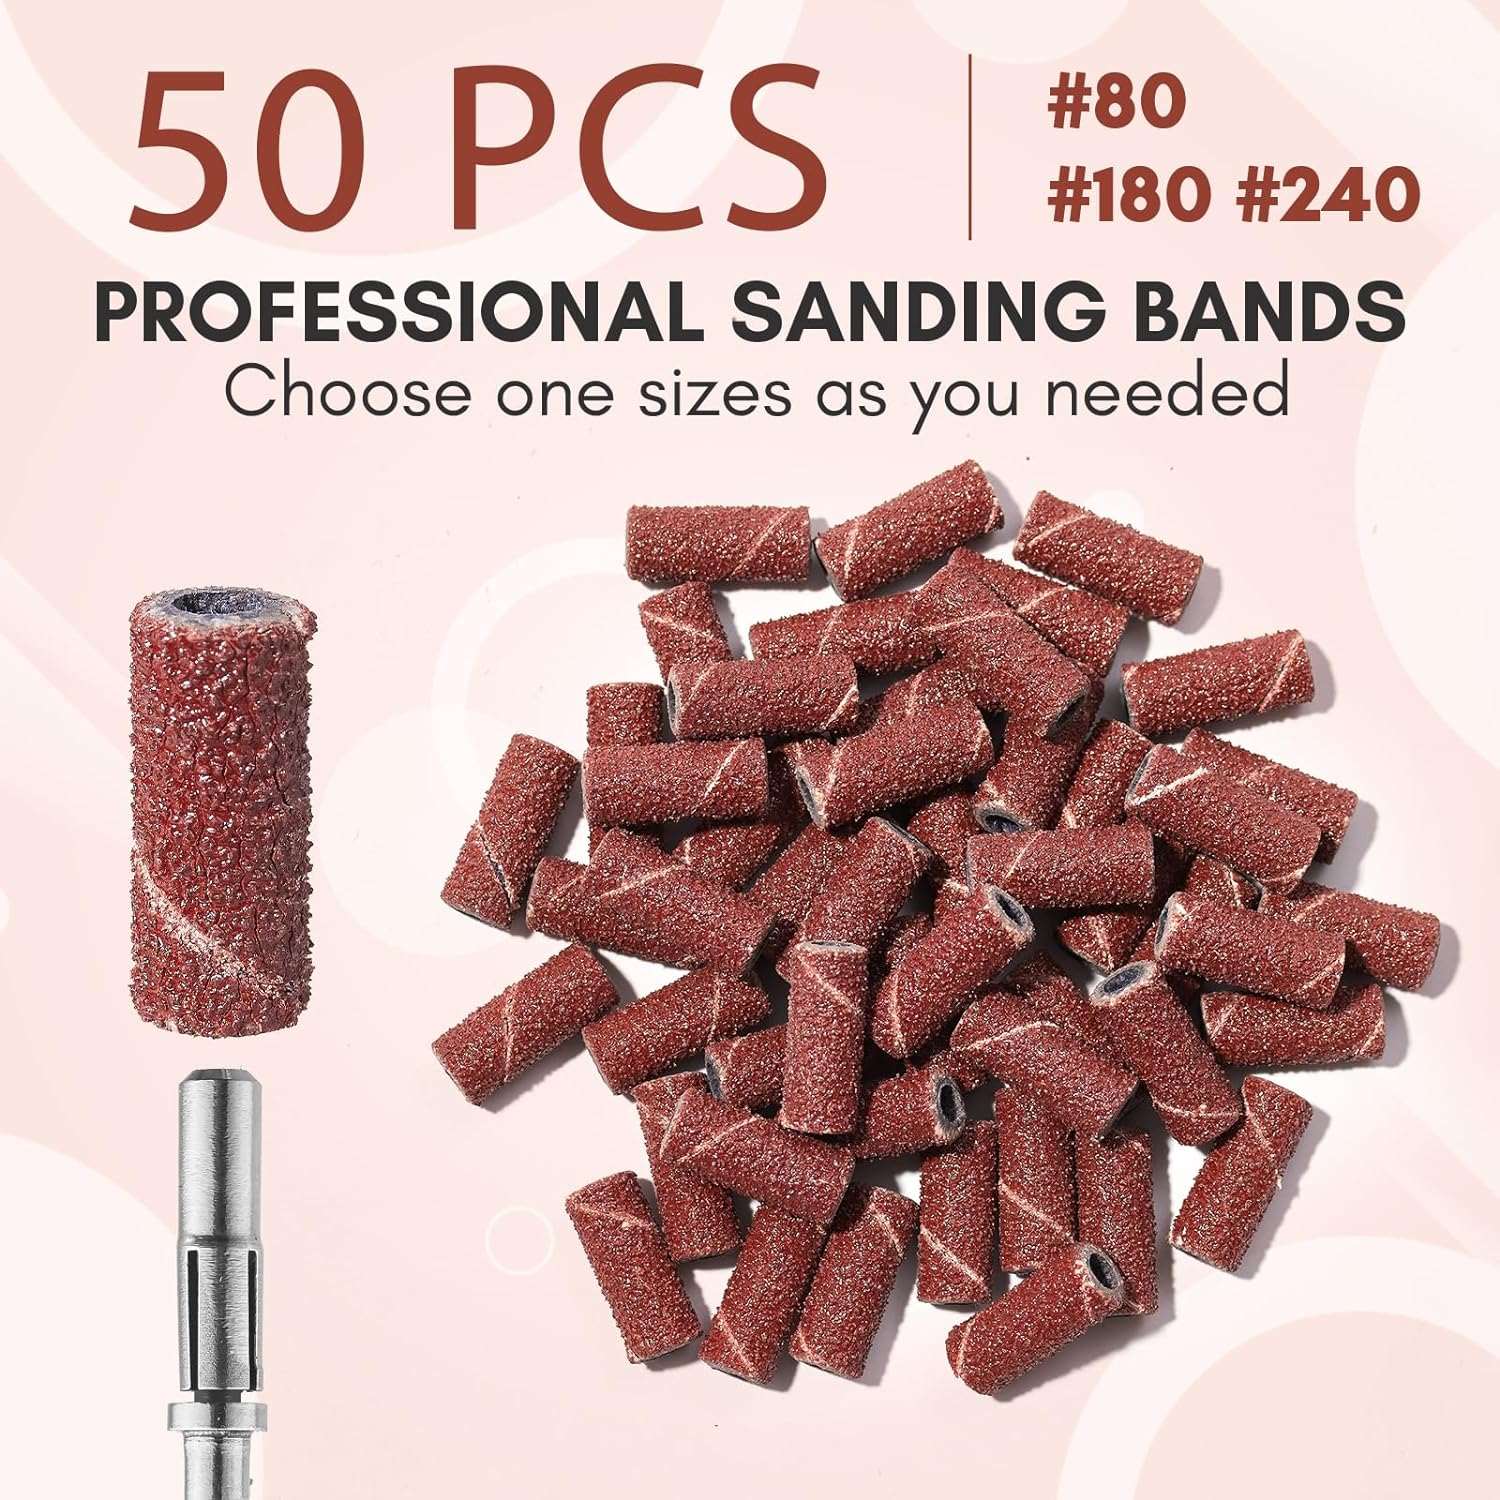 Amazon.com: Difenni Sanding Bands for Nail Drill,Nail Drill Bits Sanding  Bands 300pcs Nail Sanding Bands 80#150#240# Coarse Fine Grits with Rainbow  3/32